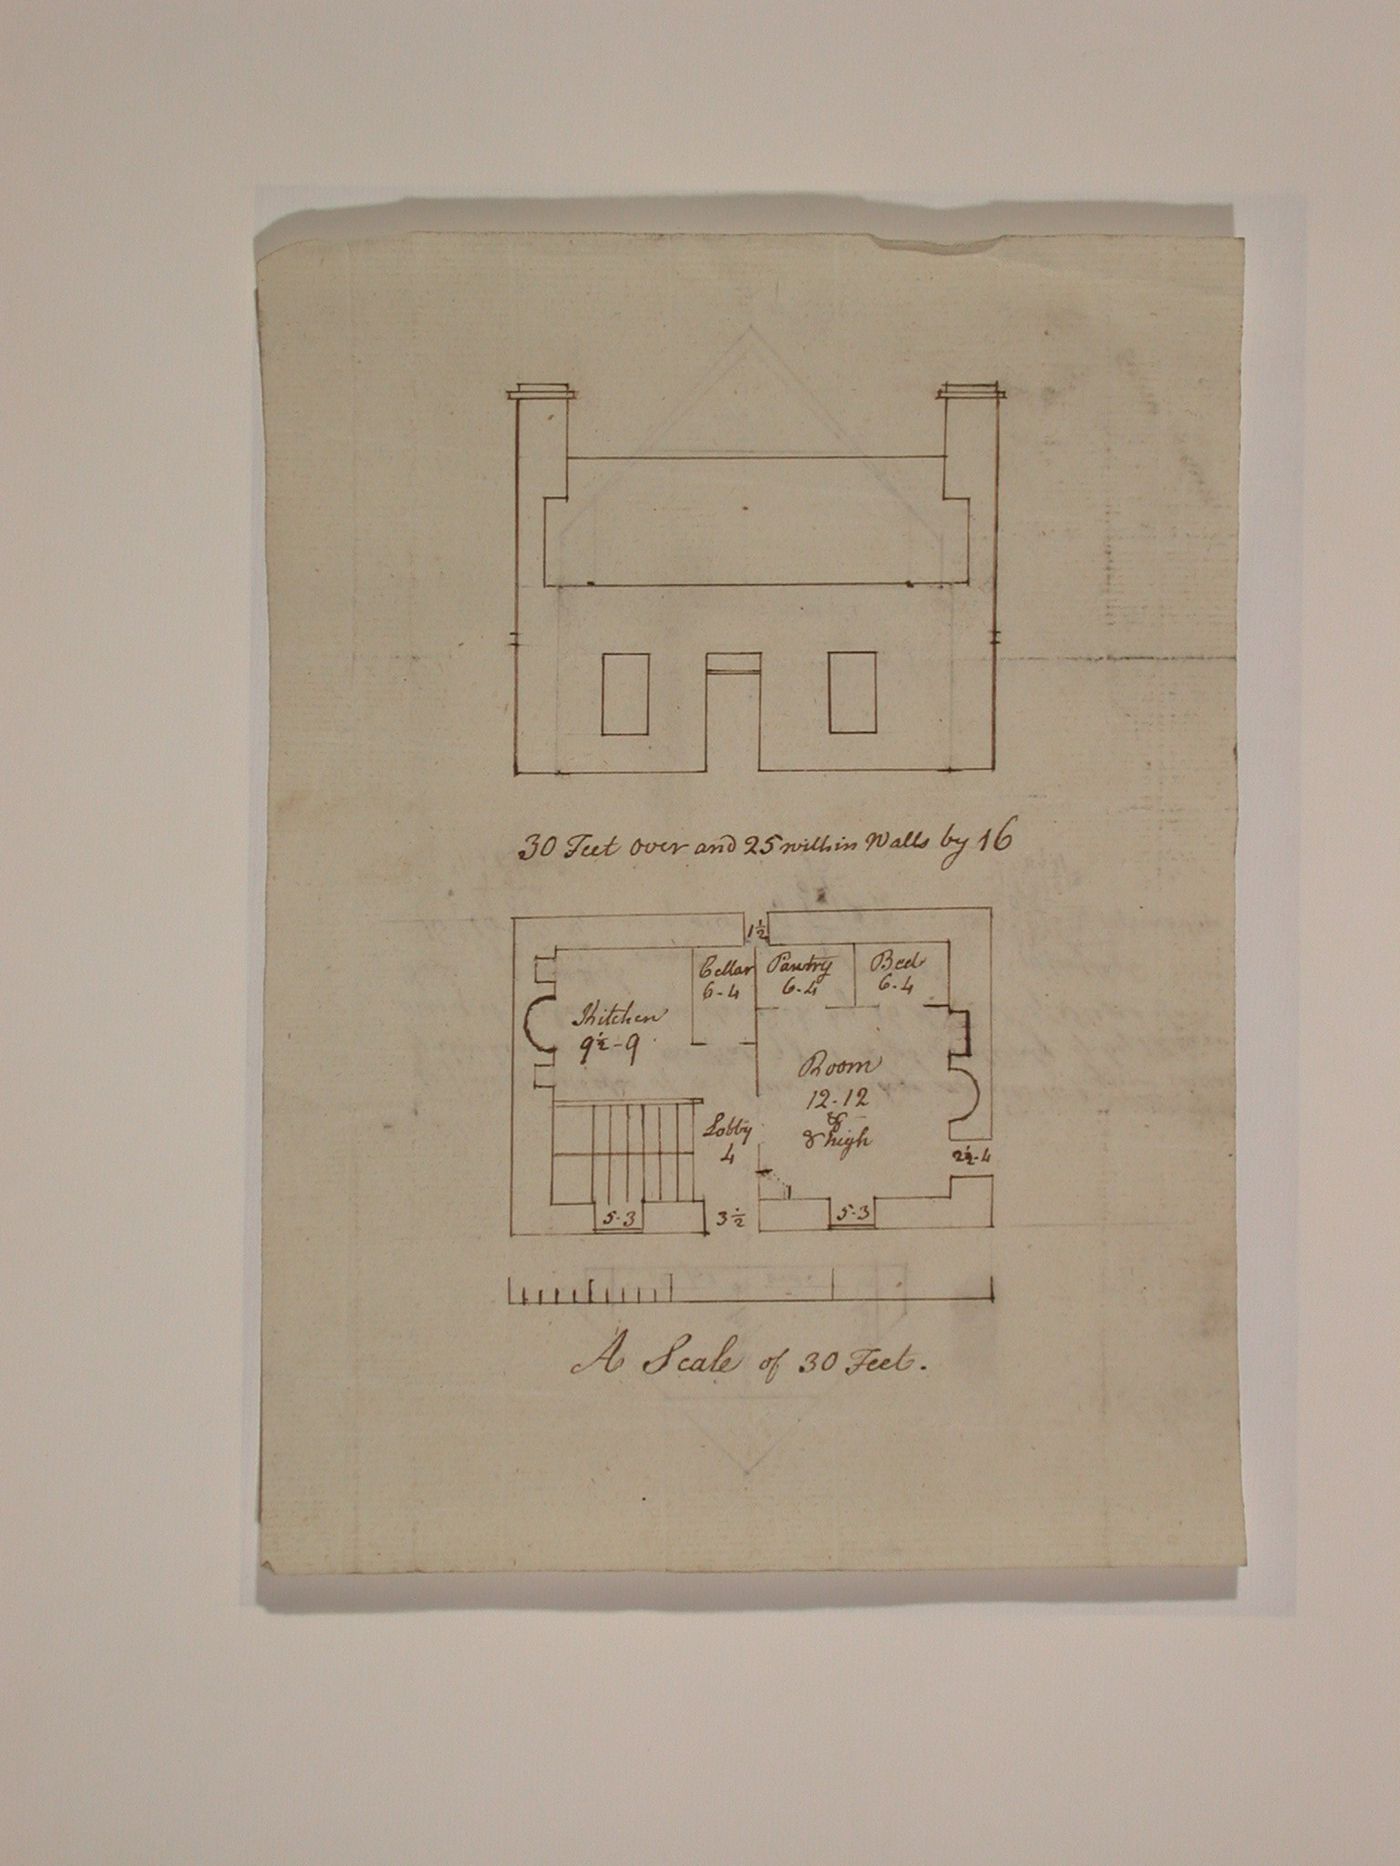 Ground plan and elevation for a house; verso: Roof elevations for a house